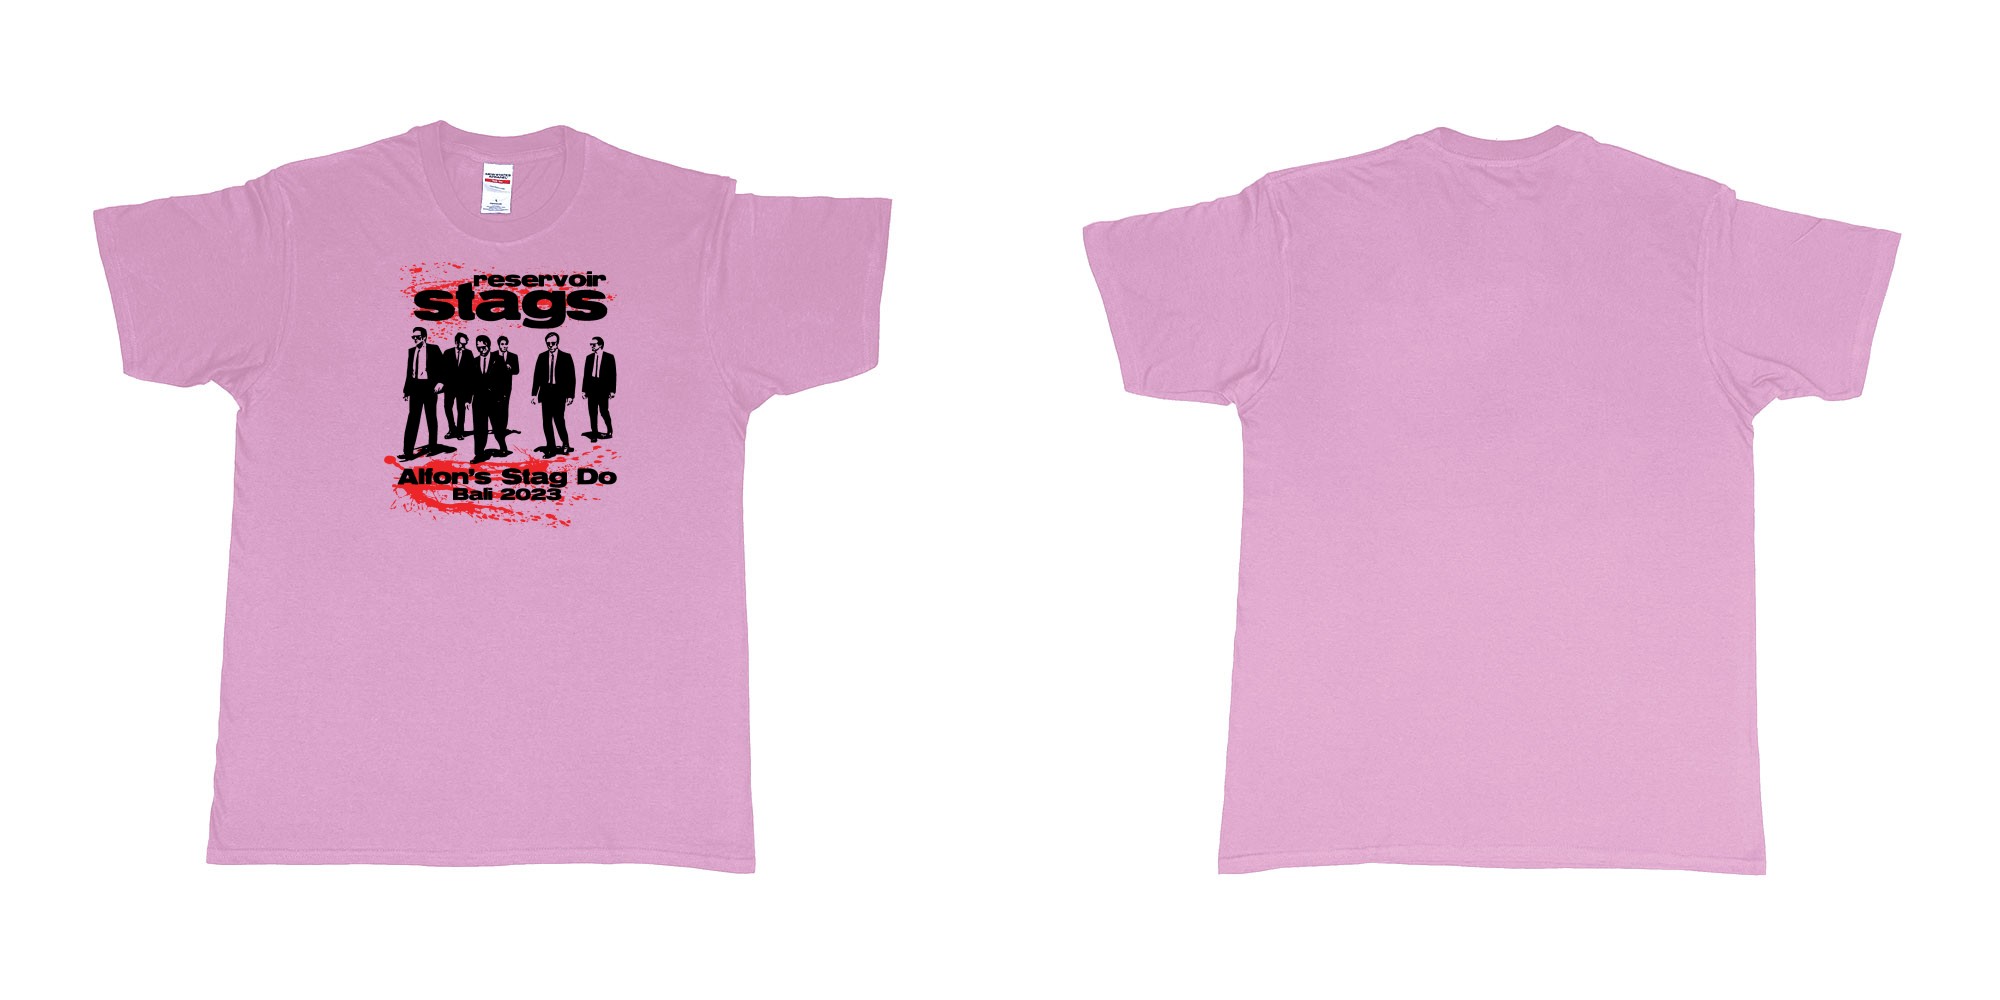 Custom tshirt design Reservoir Dogs Stag in fabric color light-pink choice your own text made in Bali by The Pirate Way